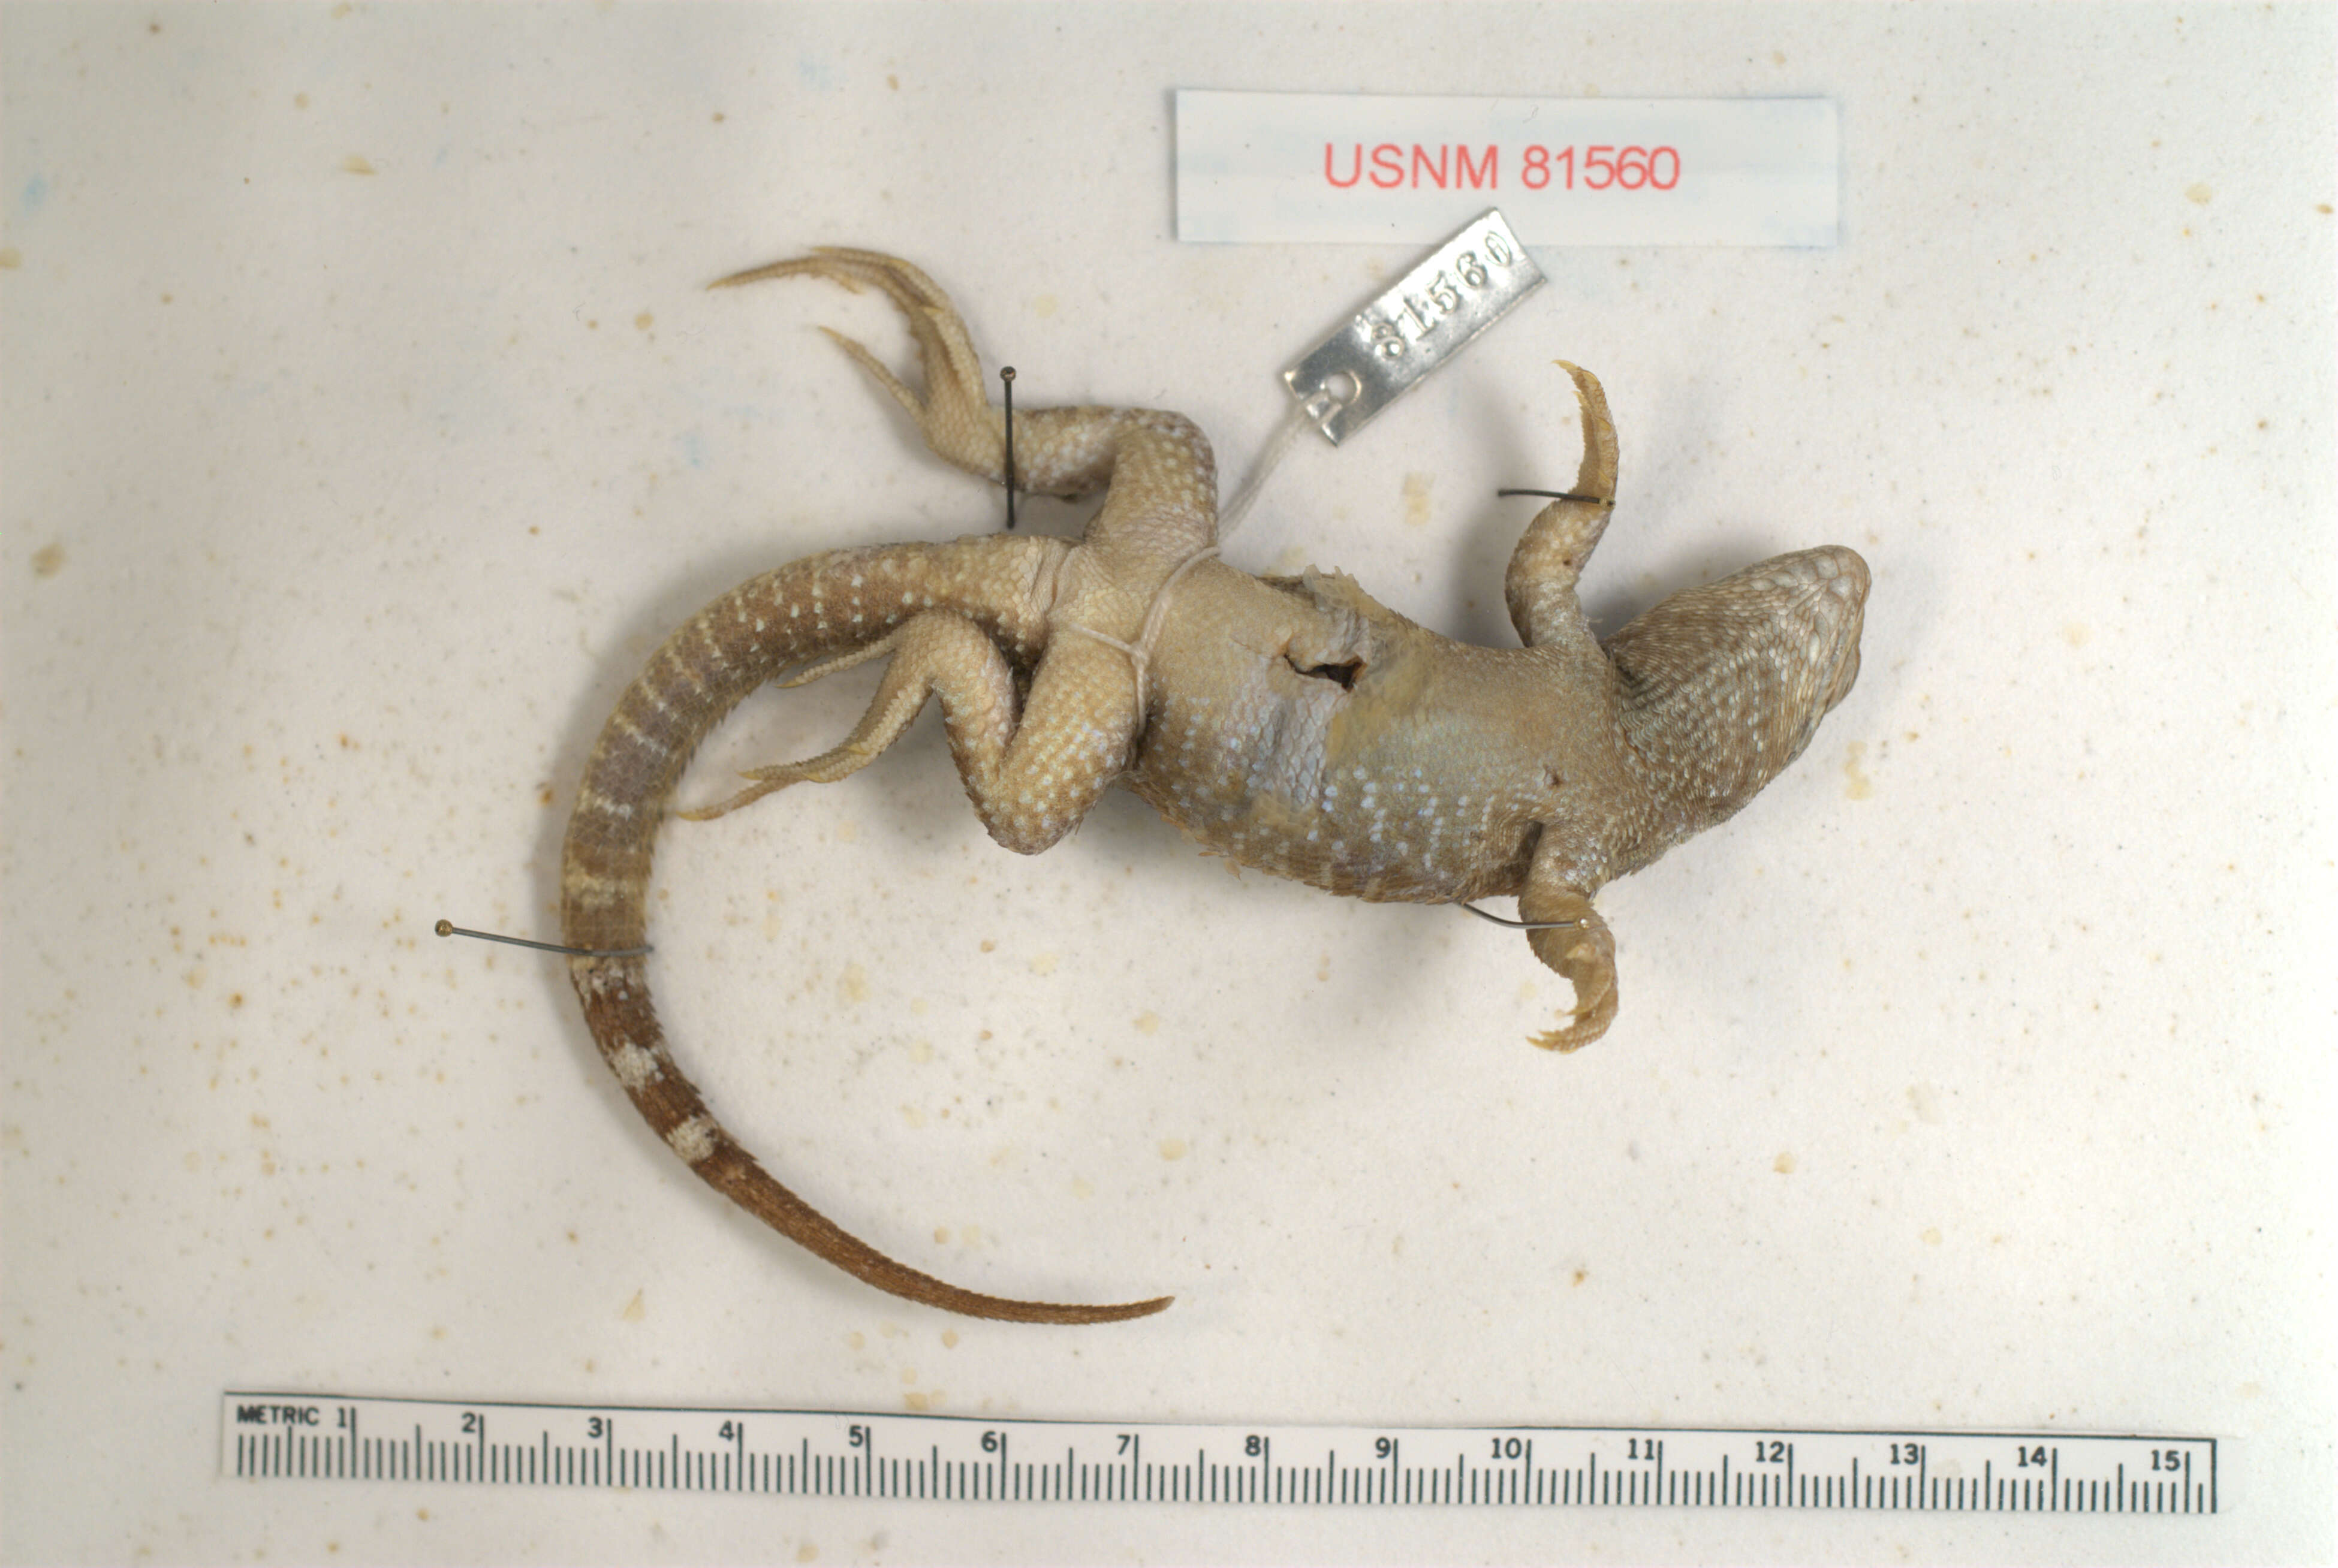 Image of Spotted Curlytail Lizard